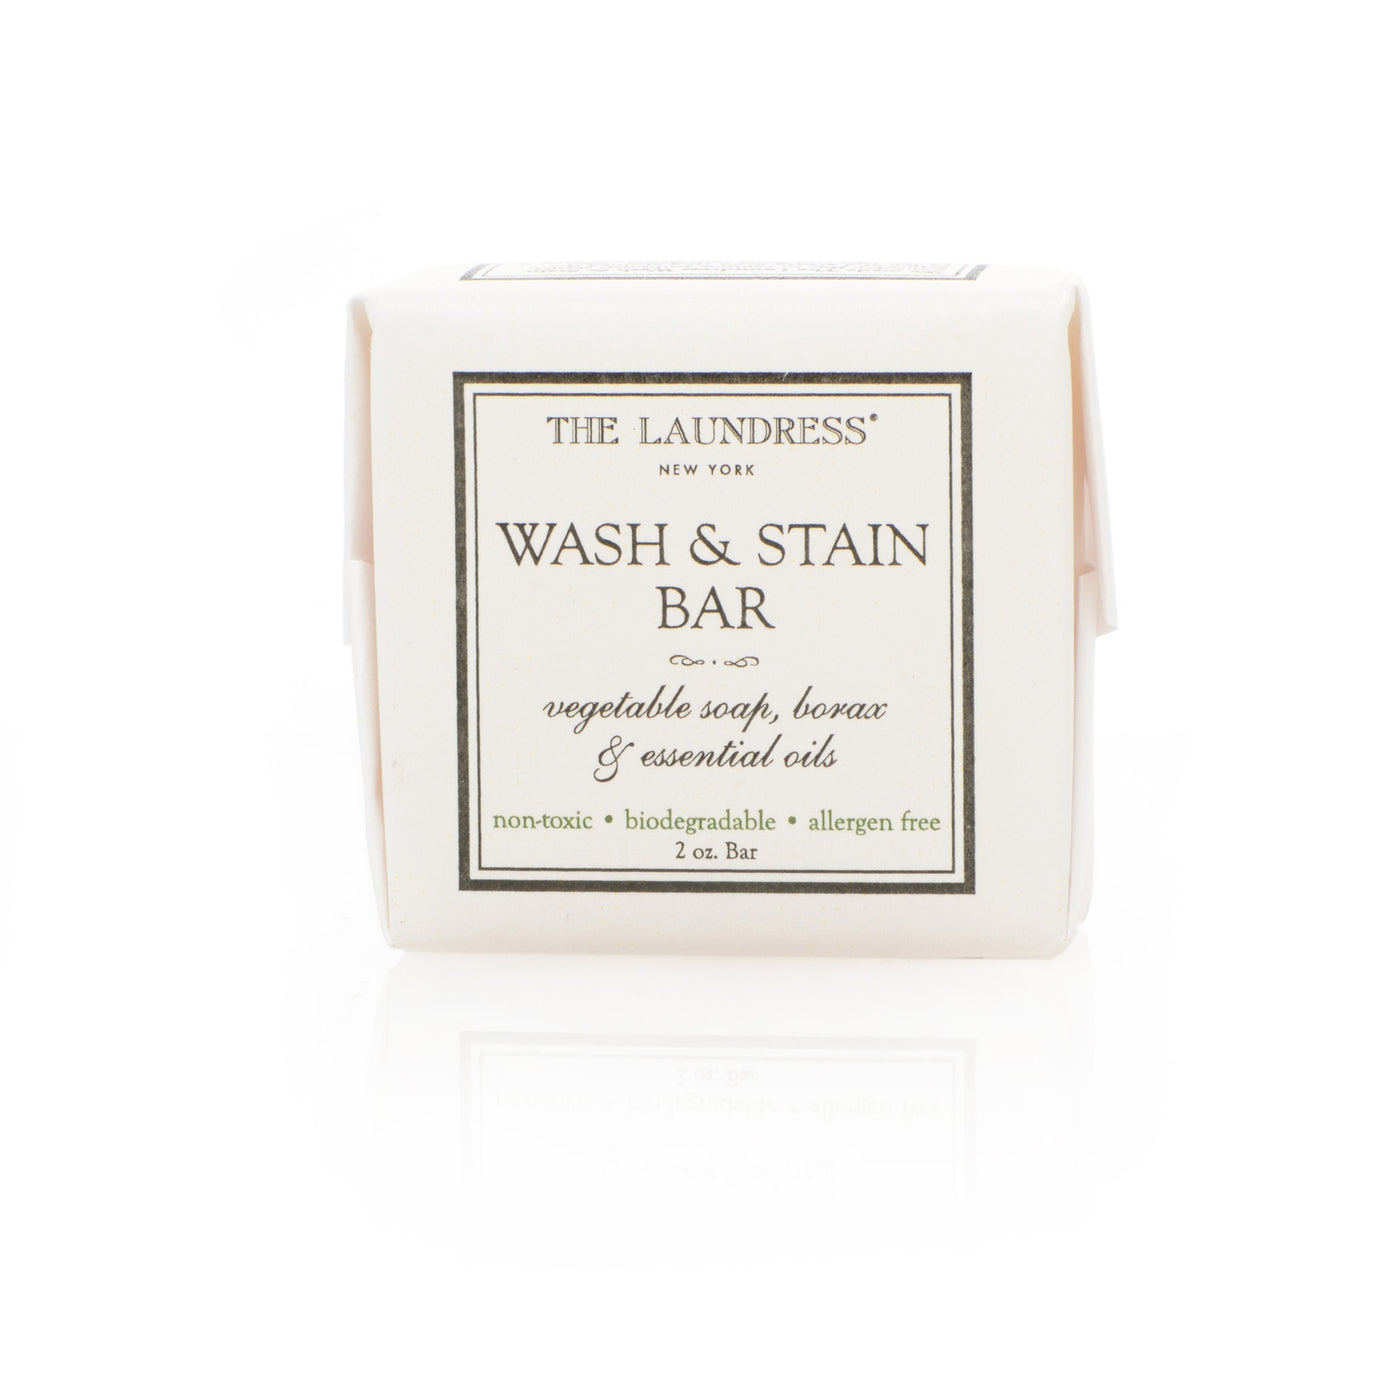 wash & stain bar, laundress, stain remover, stain guard